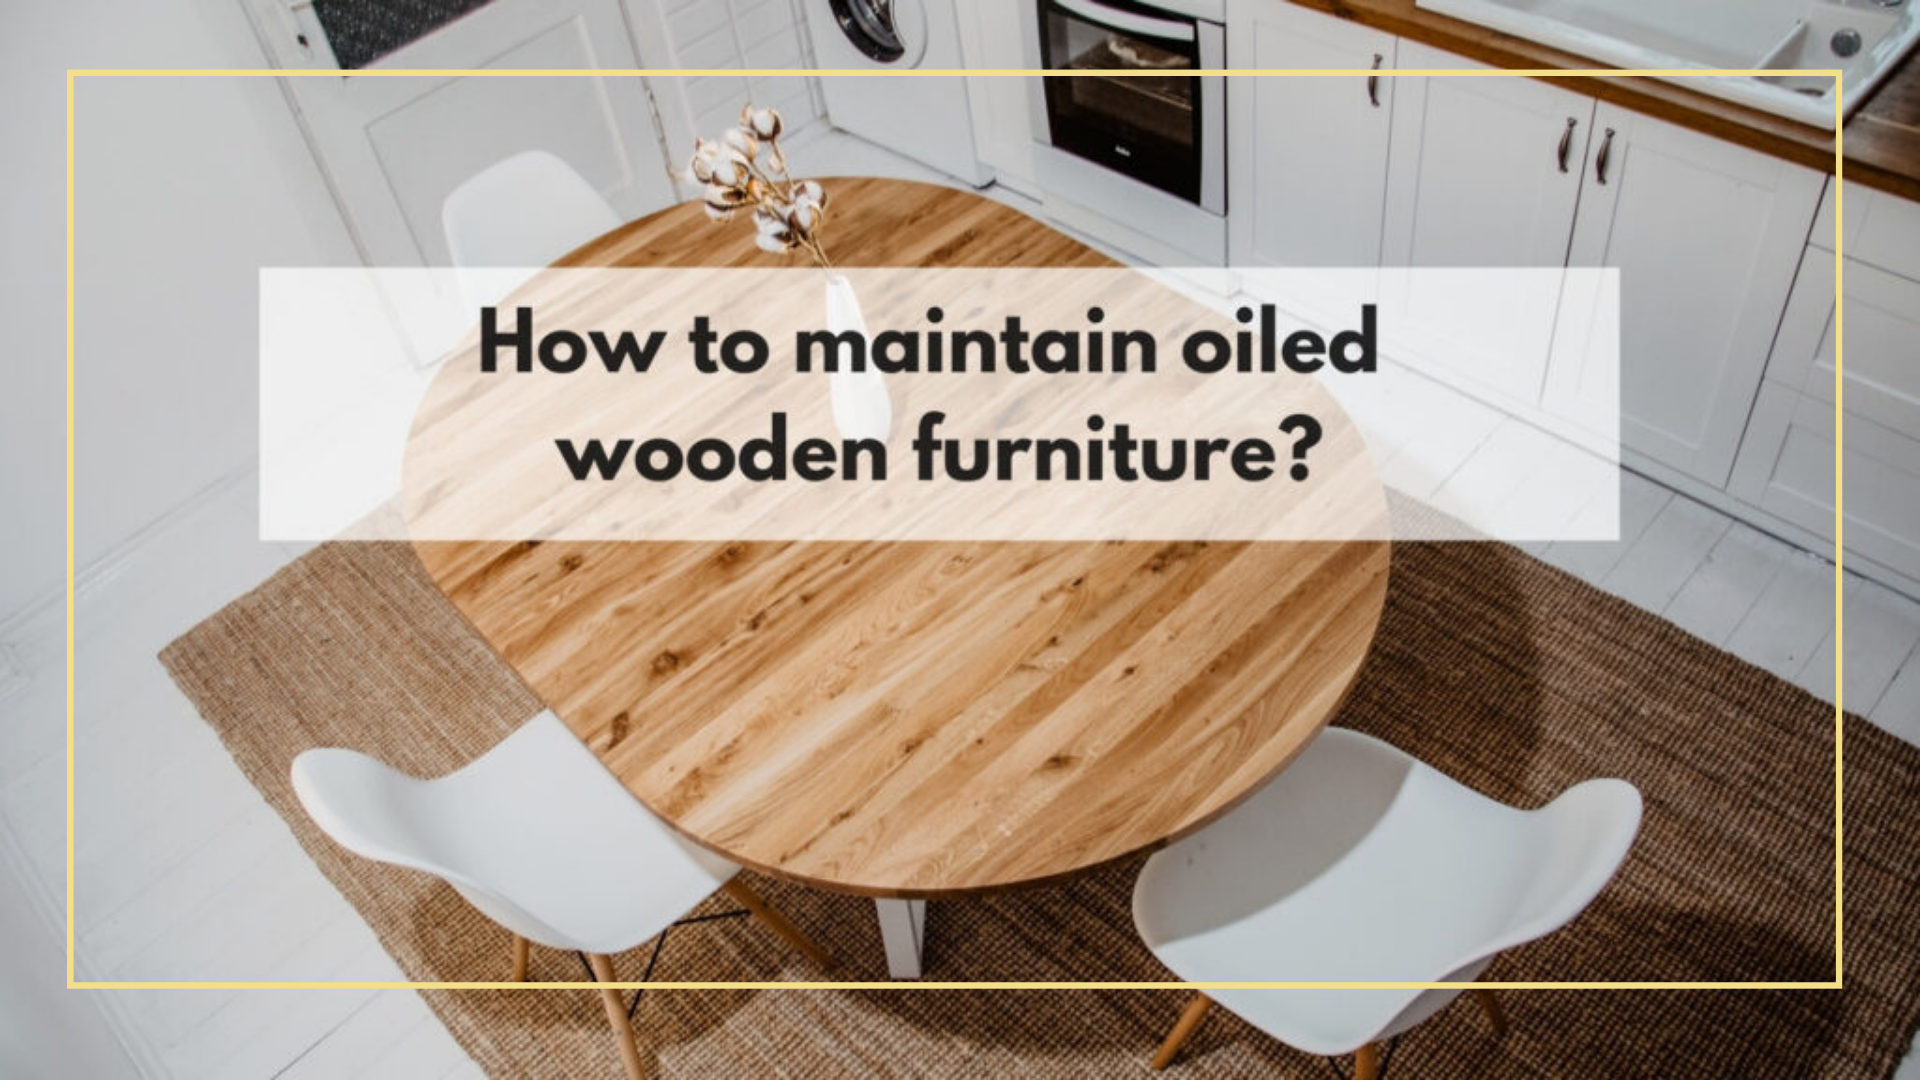 Benefits of solid wood furniture